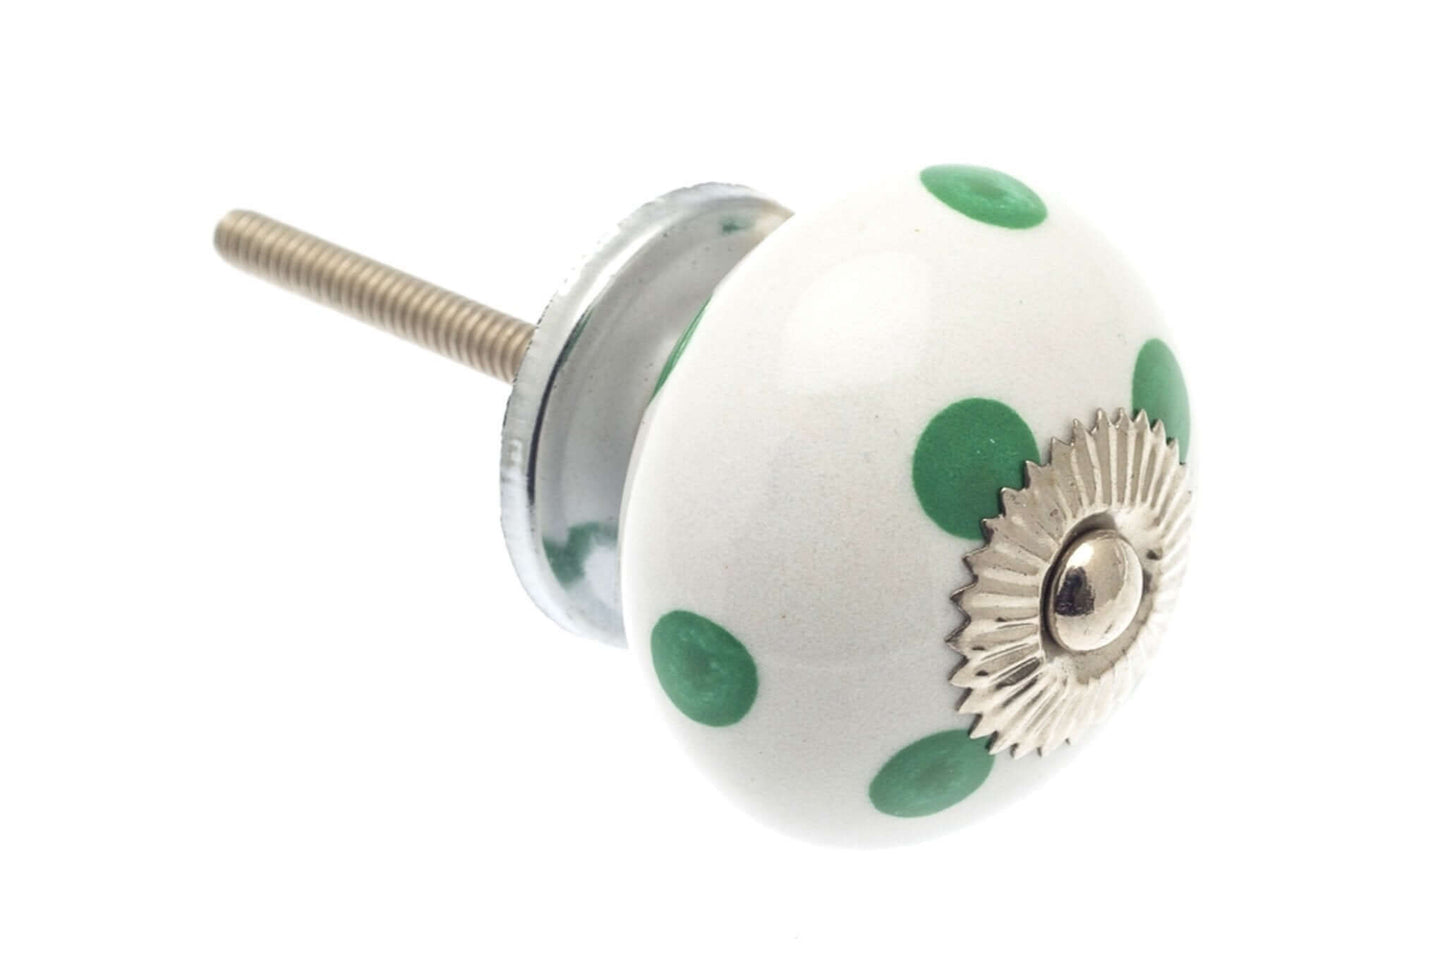 Ceramic Cupboard Knobs - Round Ceramic Knob White With Green Spots / Dots 40mm (MT-339)